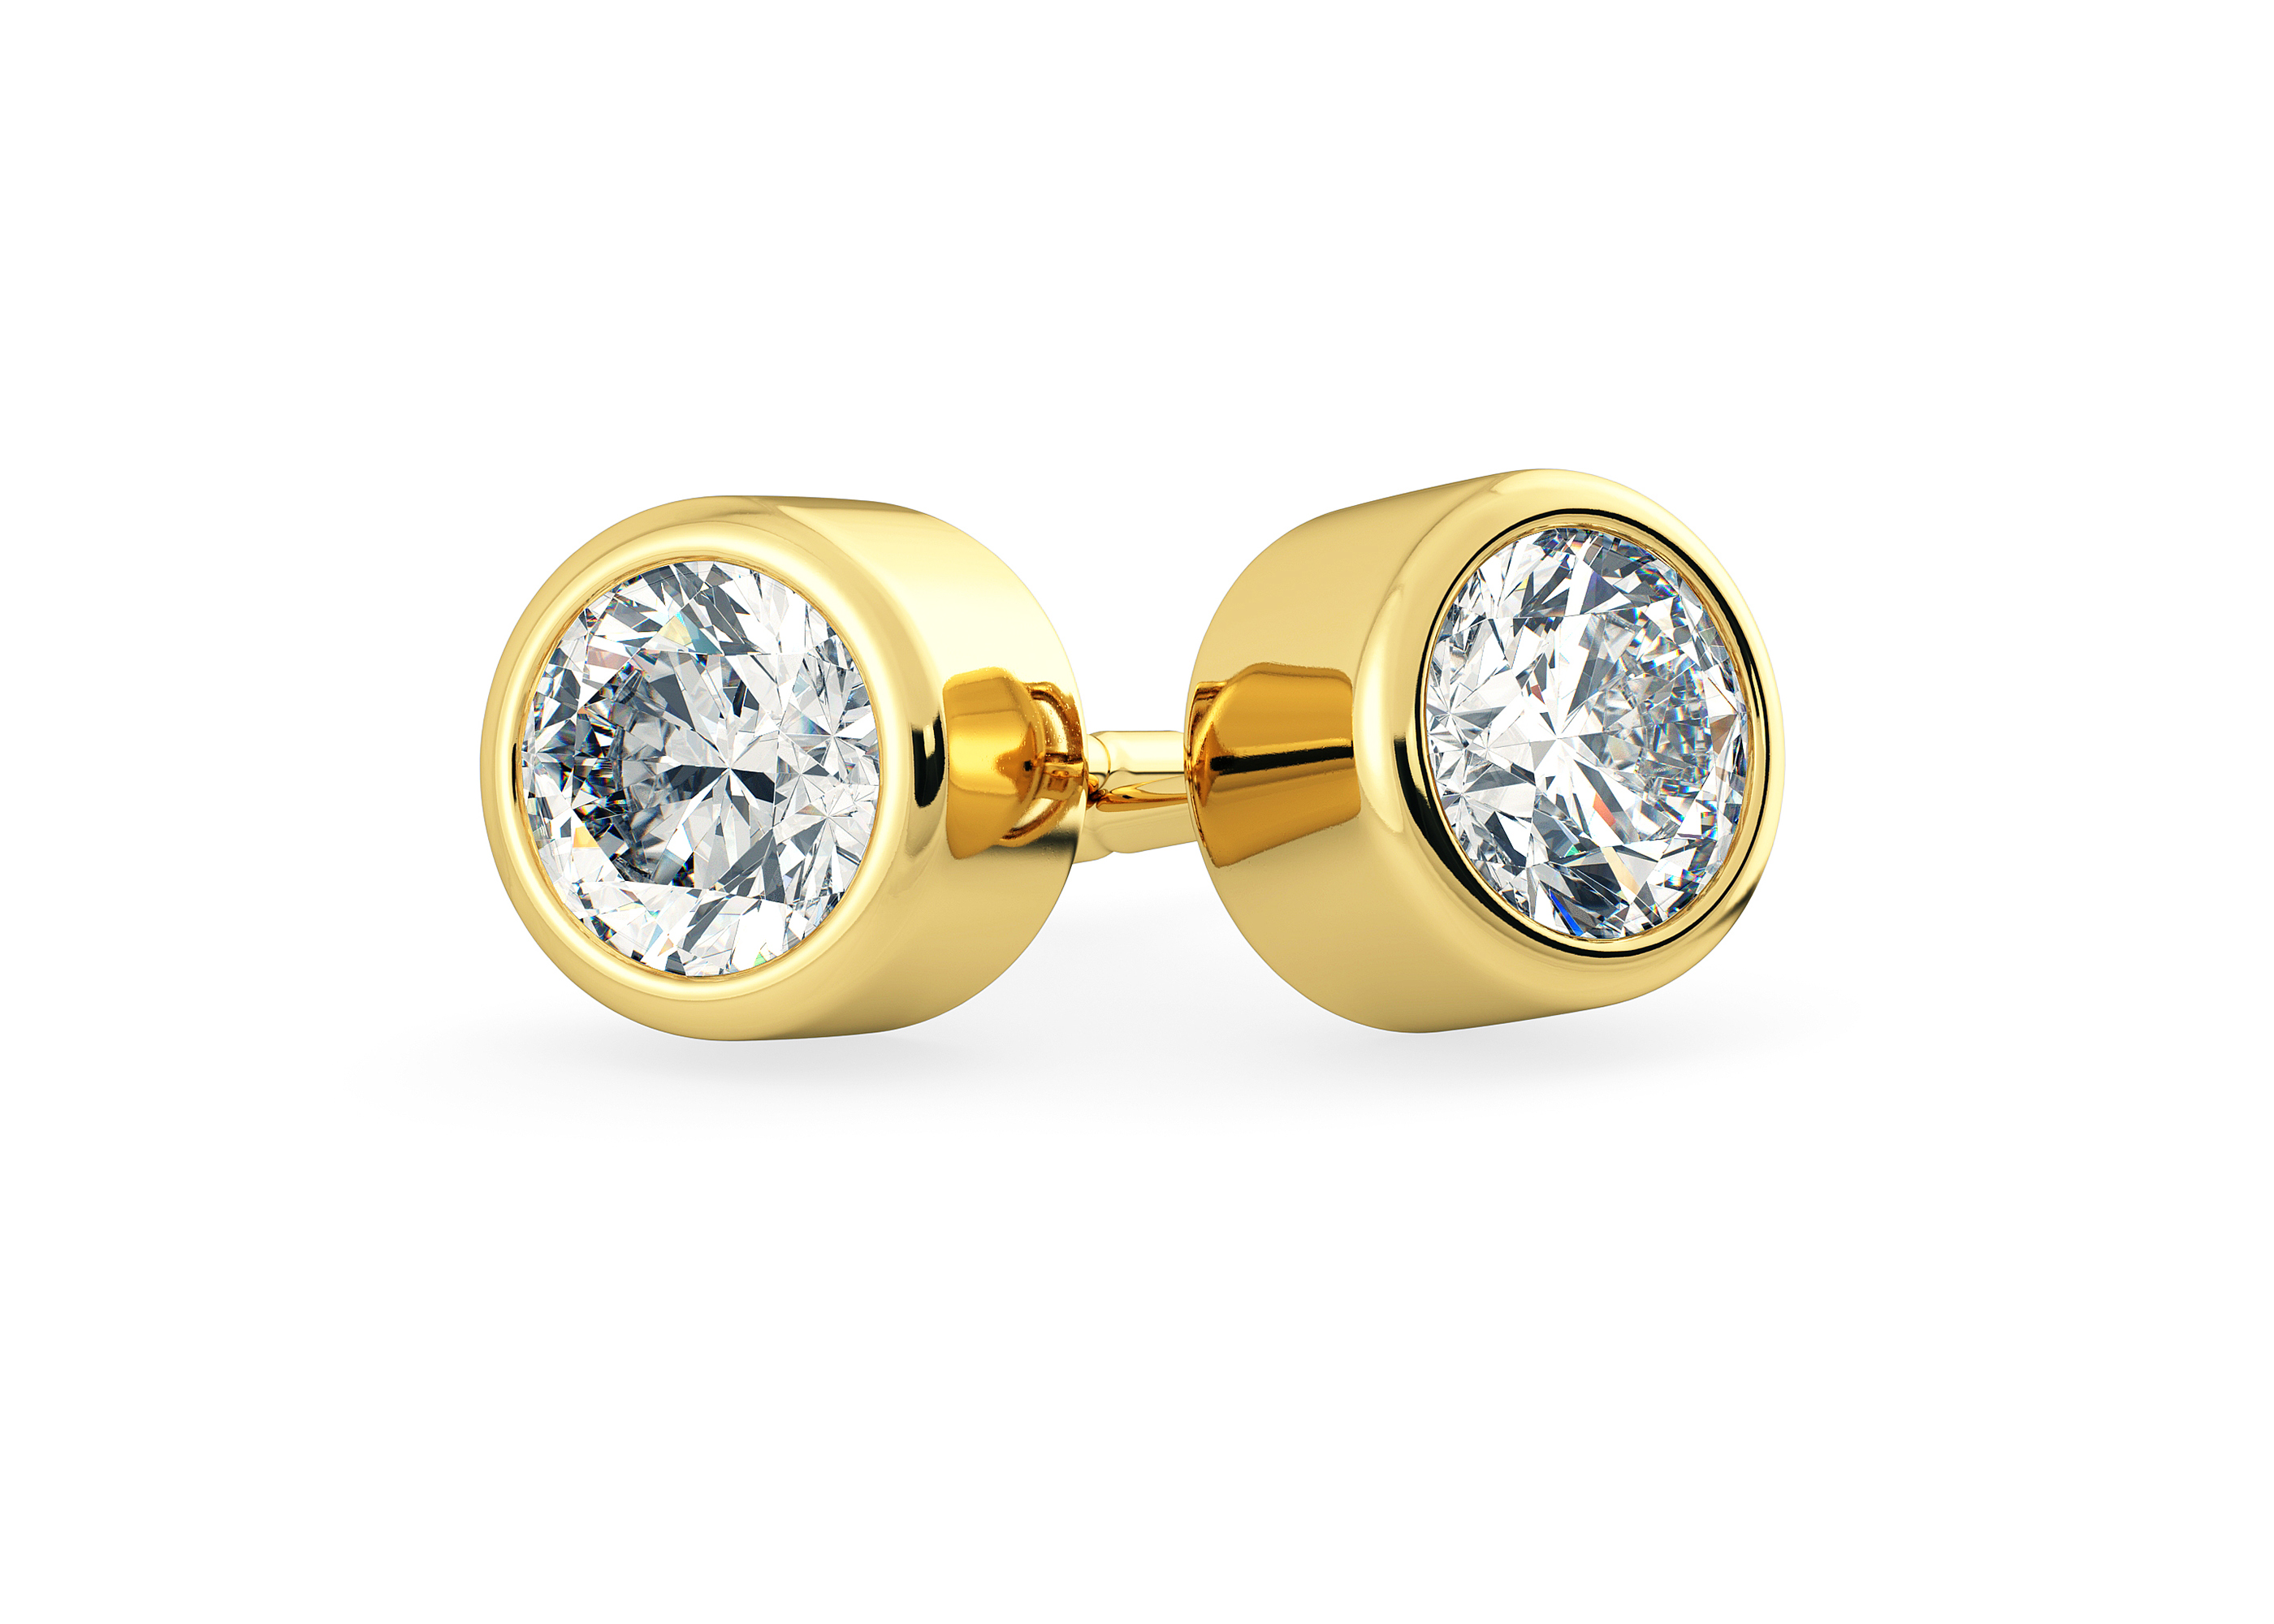 Carina Round Brilliant Diamond Stud Earrings in 18K Yellow Gold with Alpha Backs